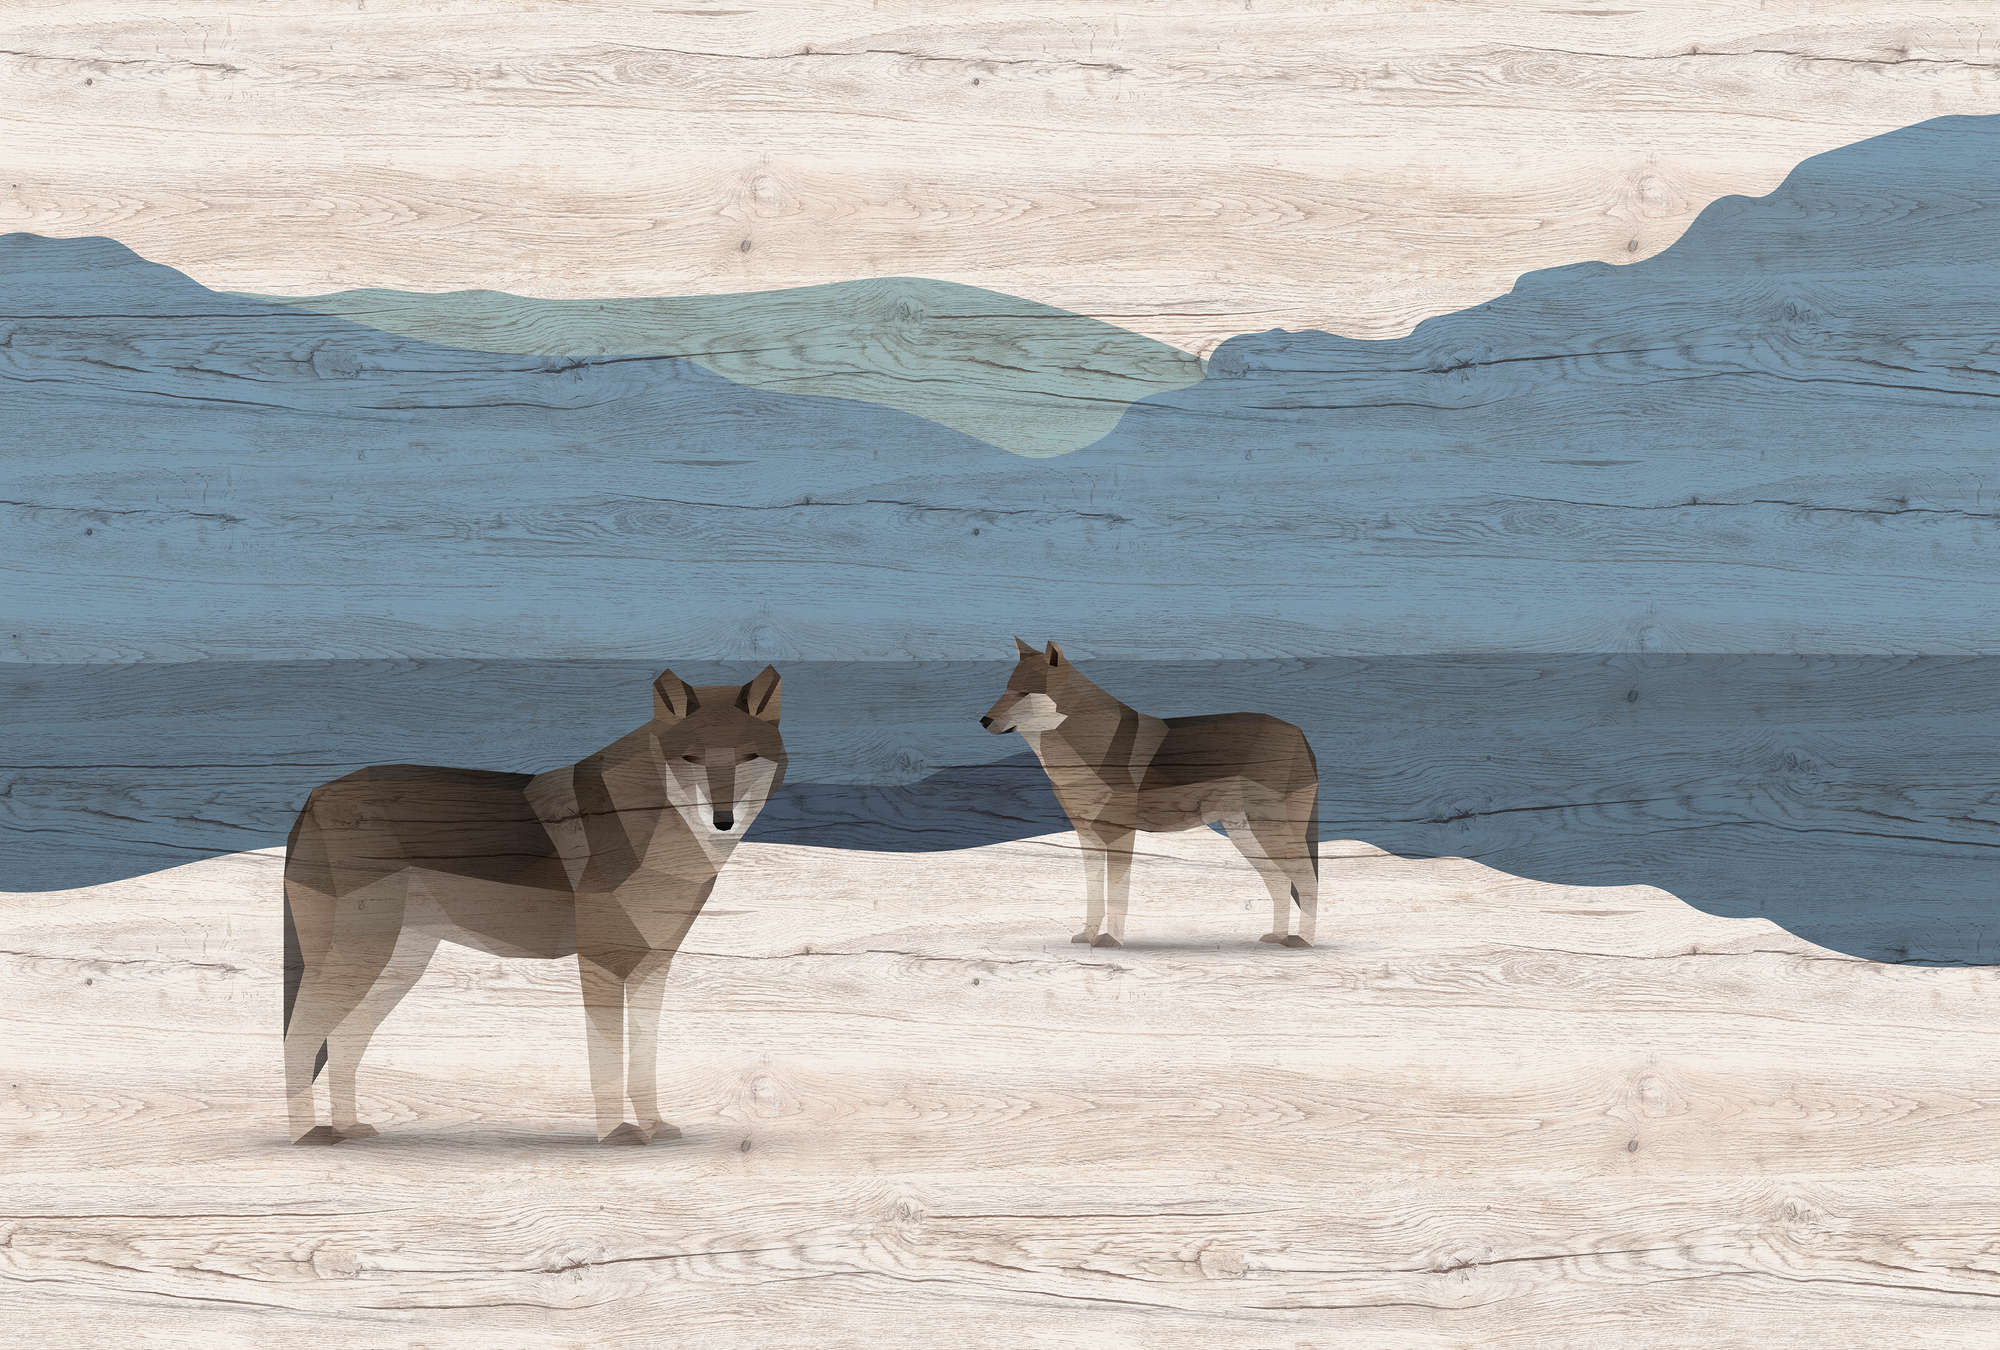             Yukon 1 - mountains & dogs mural with wood texture
        